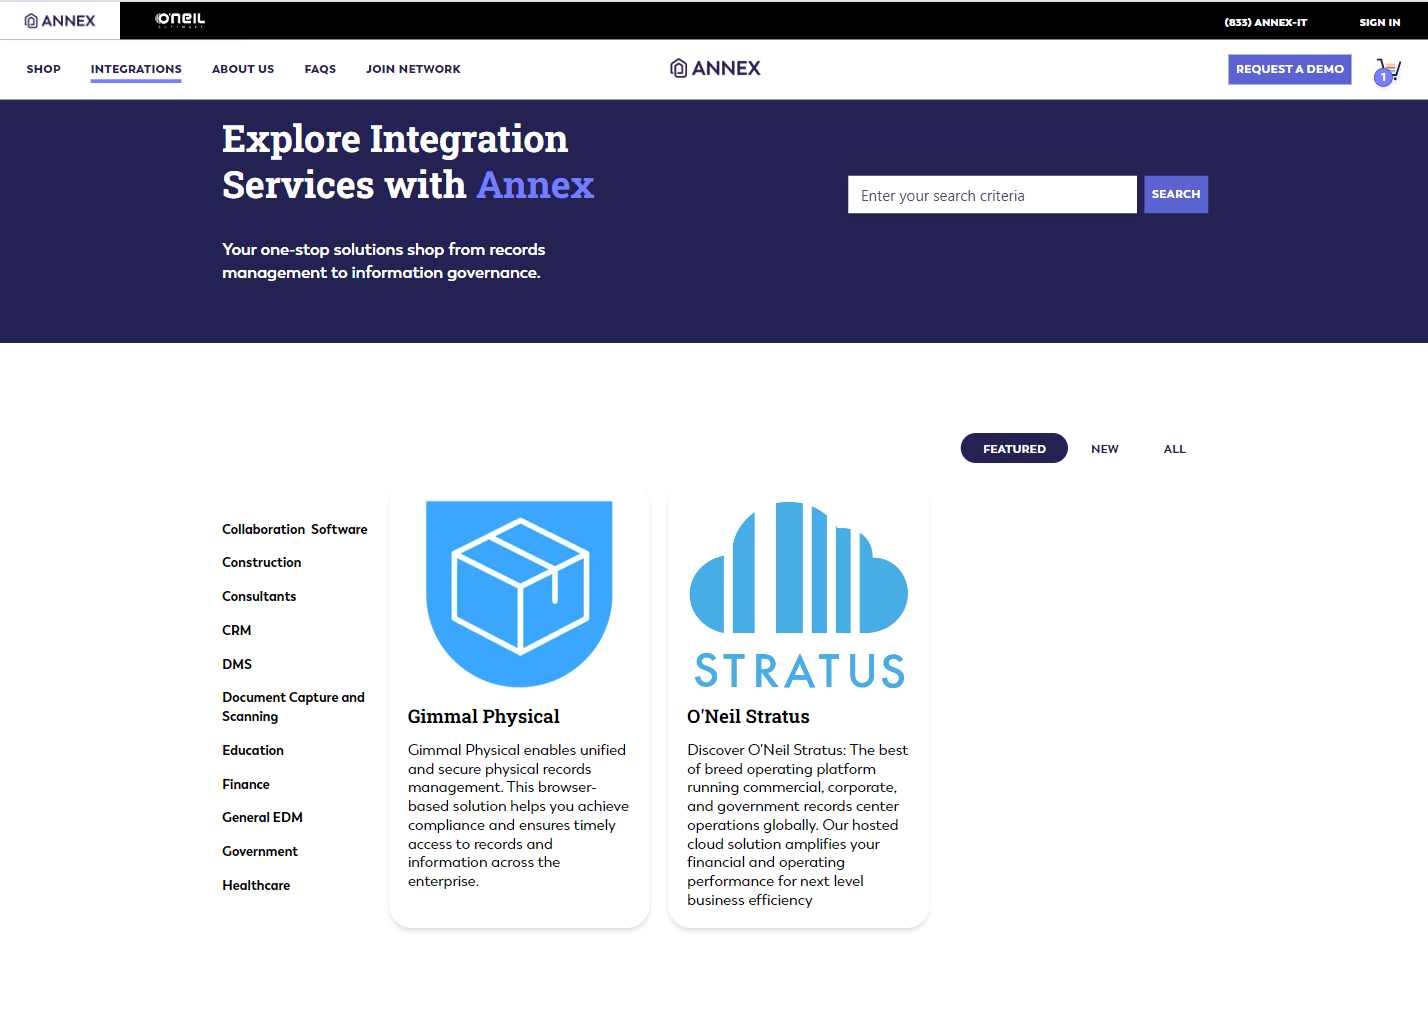 Website page for Annex, highlighting integration services with sections for Gimmal Physical and O'Neil Stratus, featuring logos and descriptions.